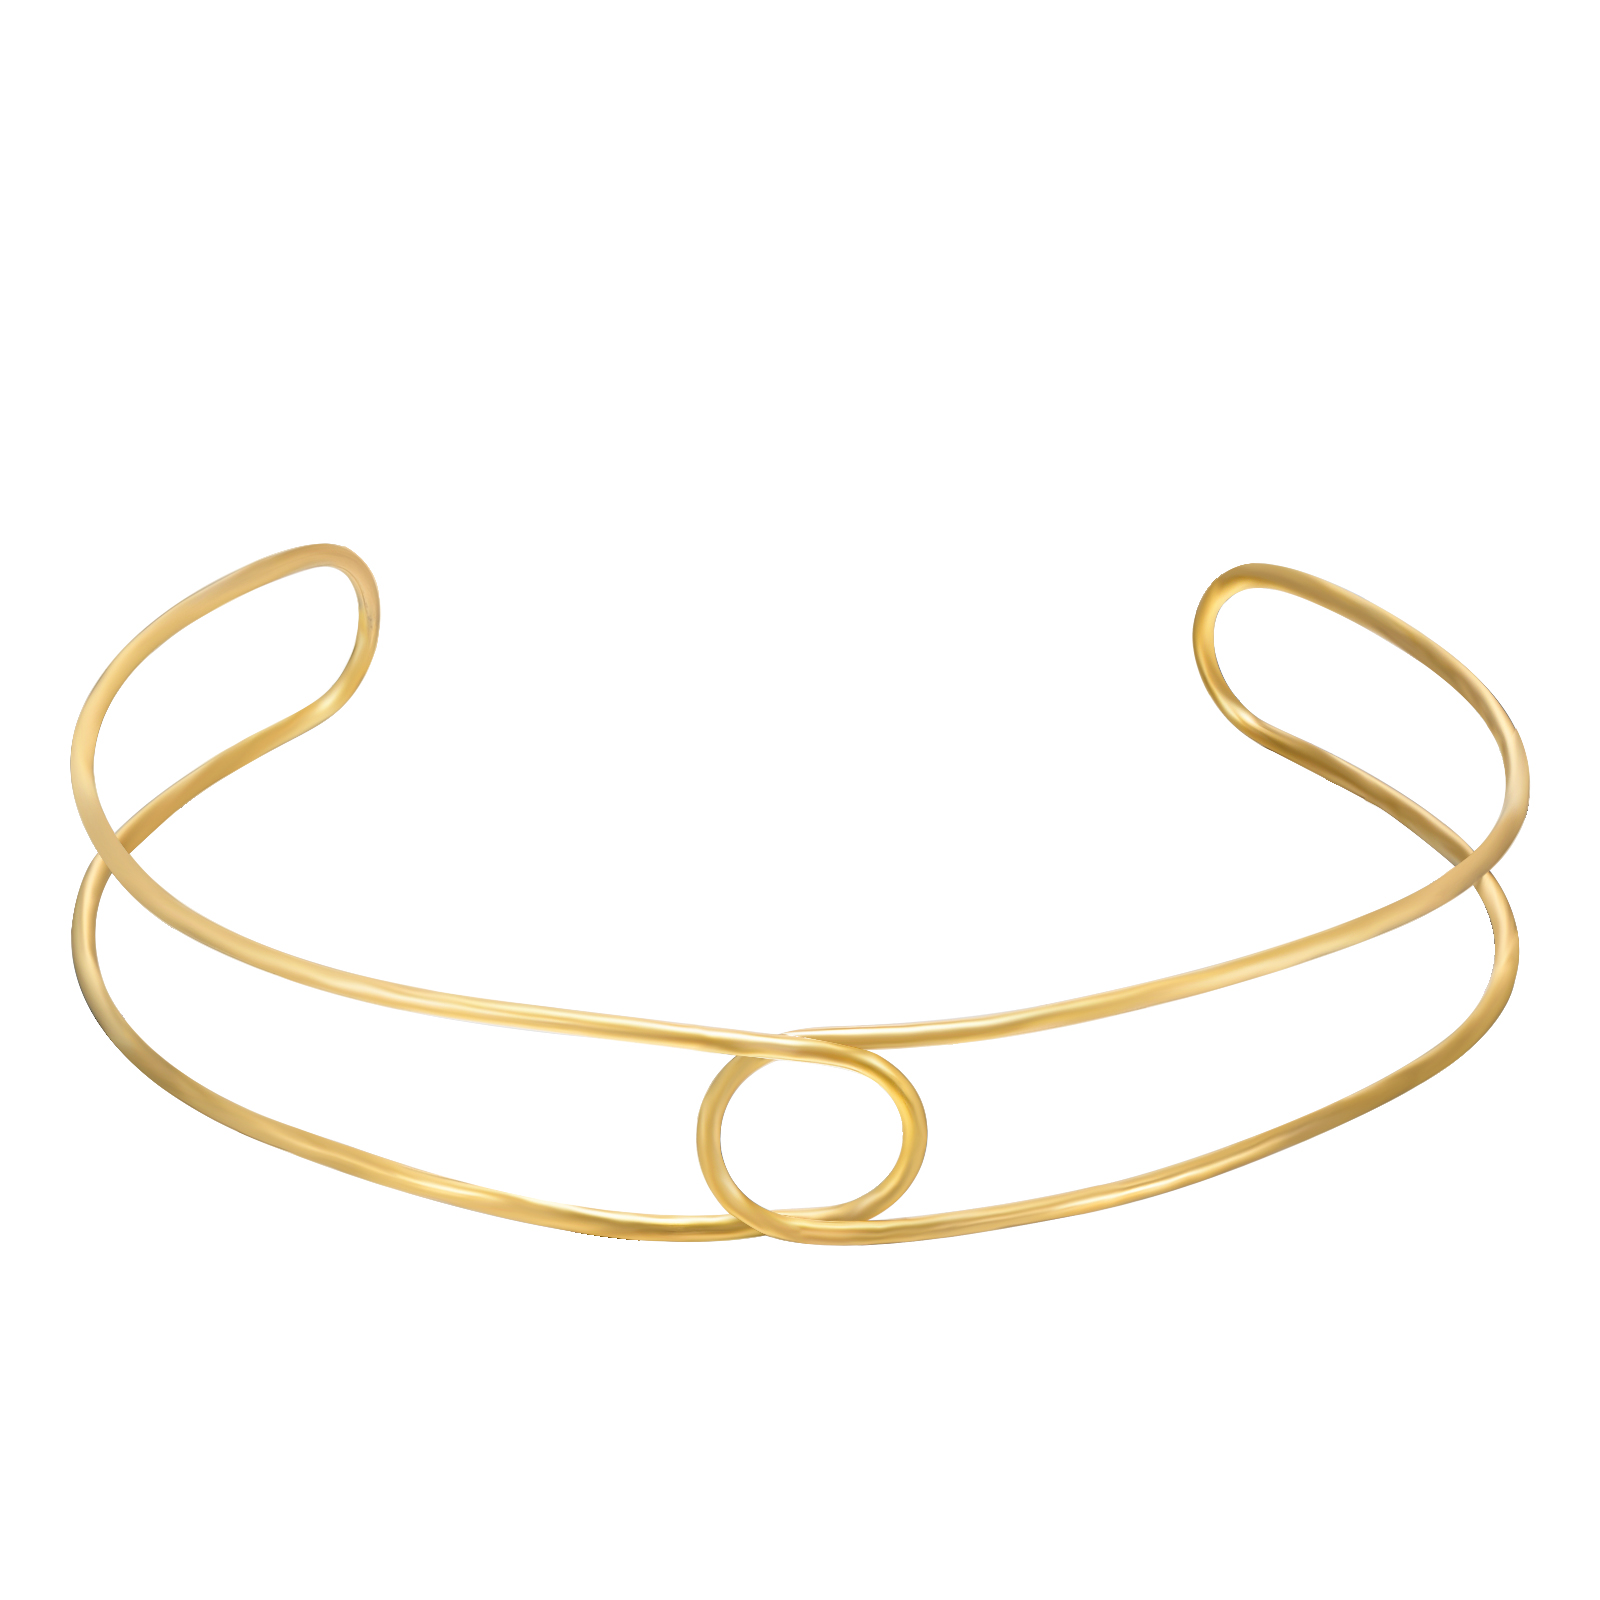 Steel Necklaces Rigid Choker - Knot Double 11cm - Gold Plated Steel